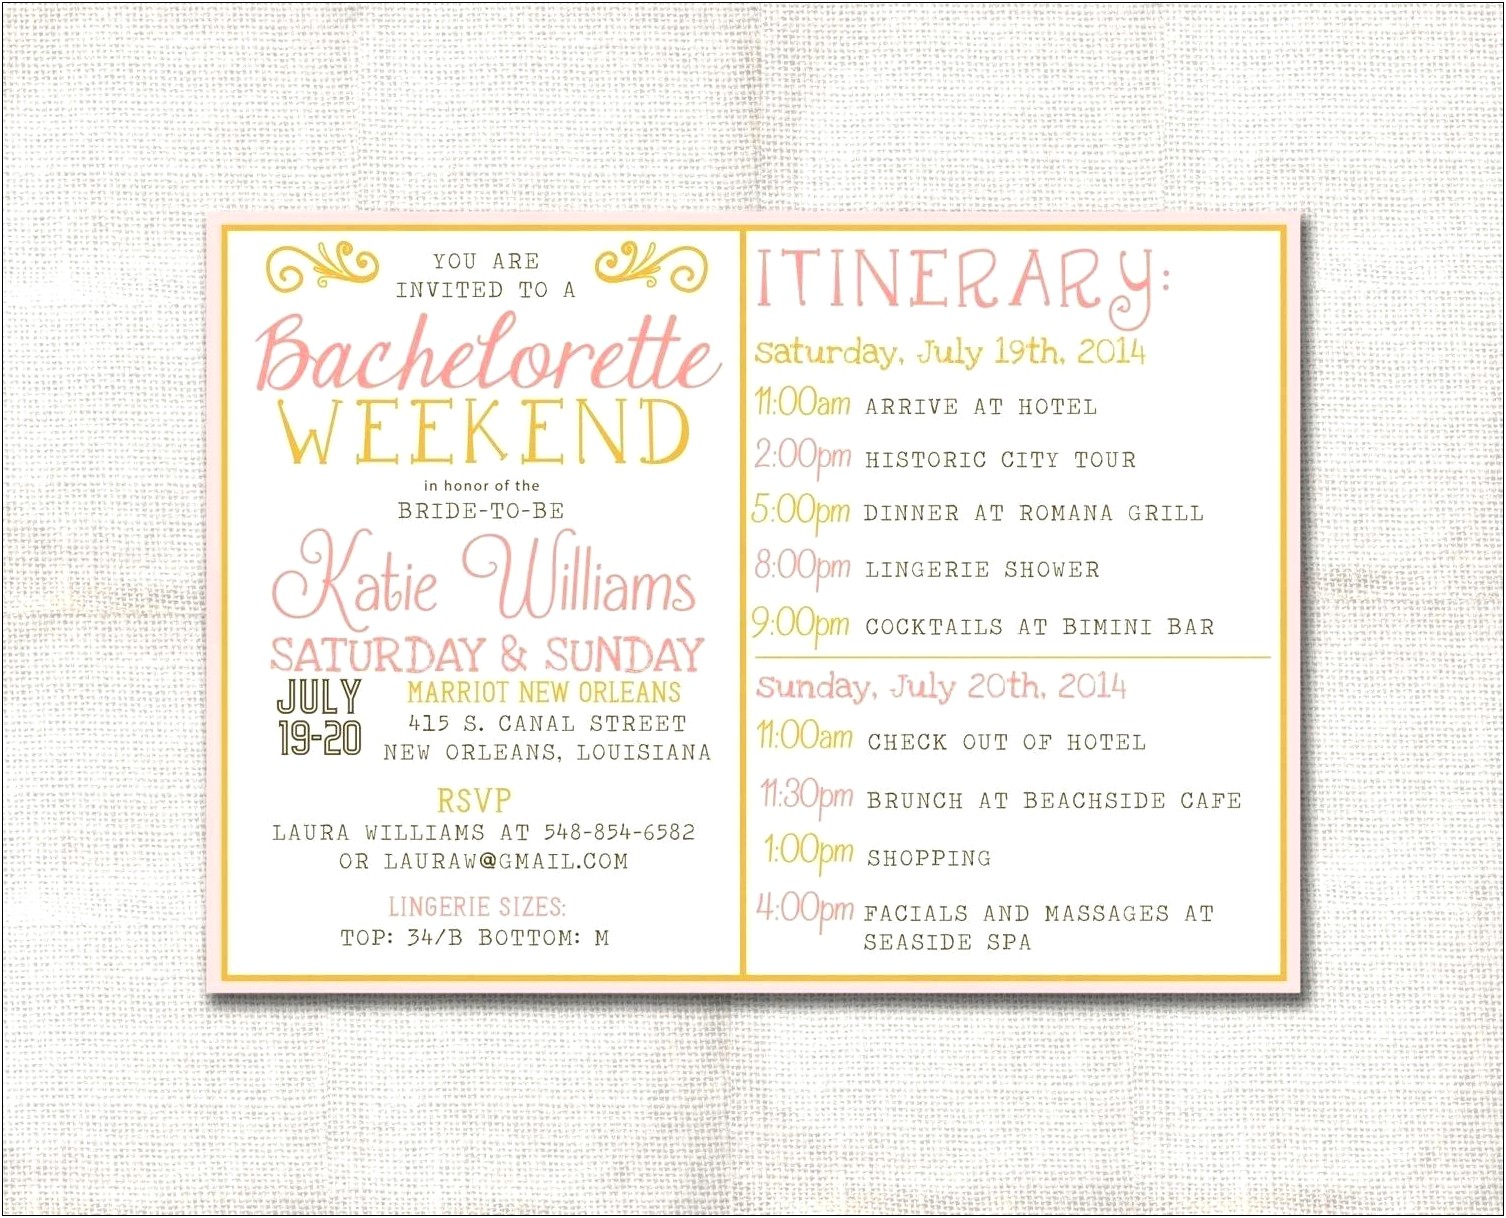 Free Itinerary Template For Bachelorette Weekend